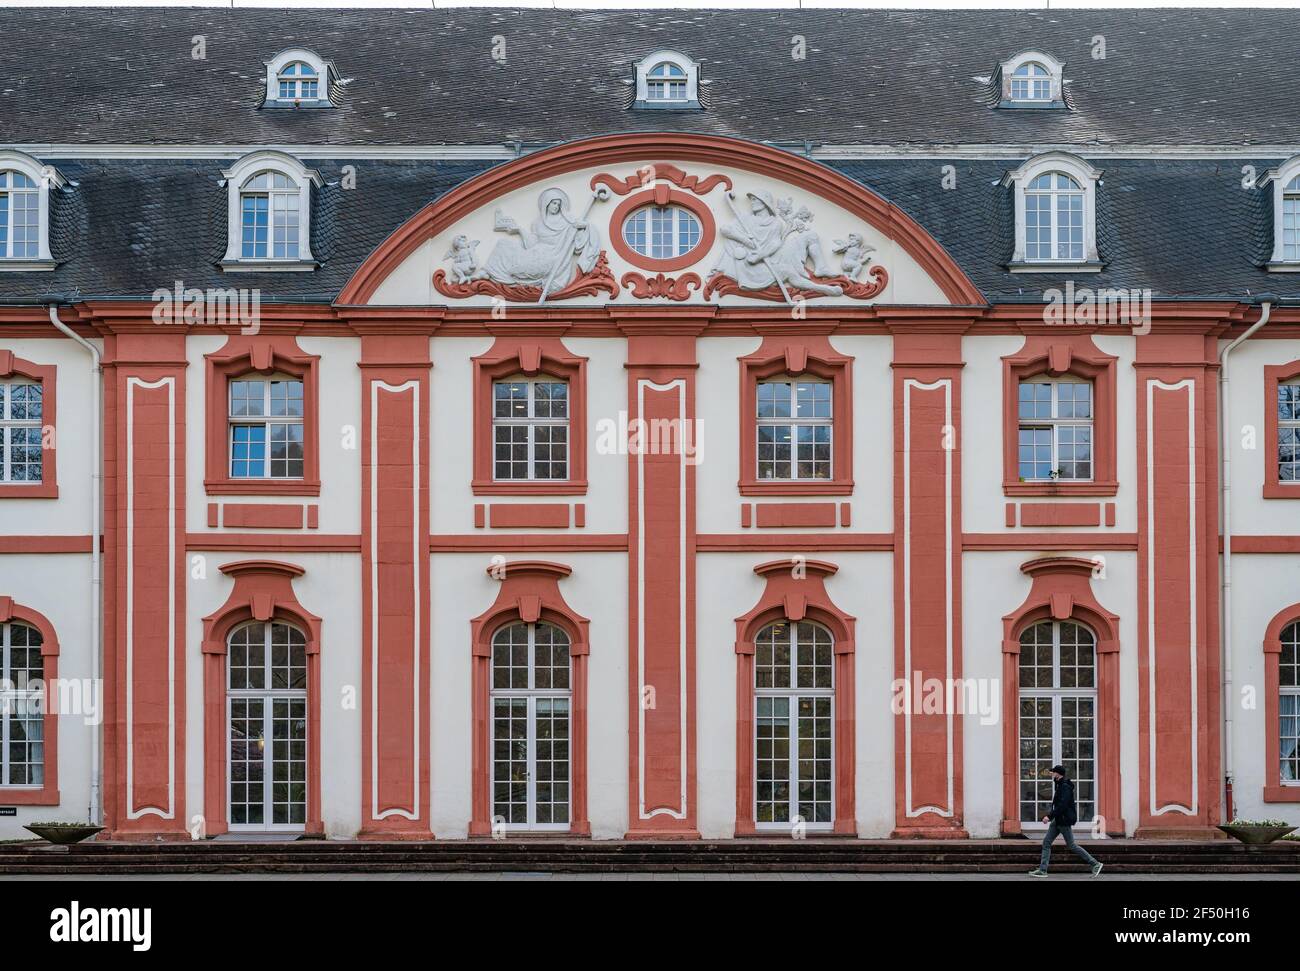 wine architecture in the Mosel Valley, Vereinigte Hospitien, Trier, Germany Stock Photo